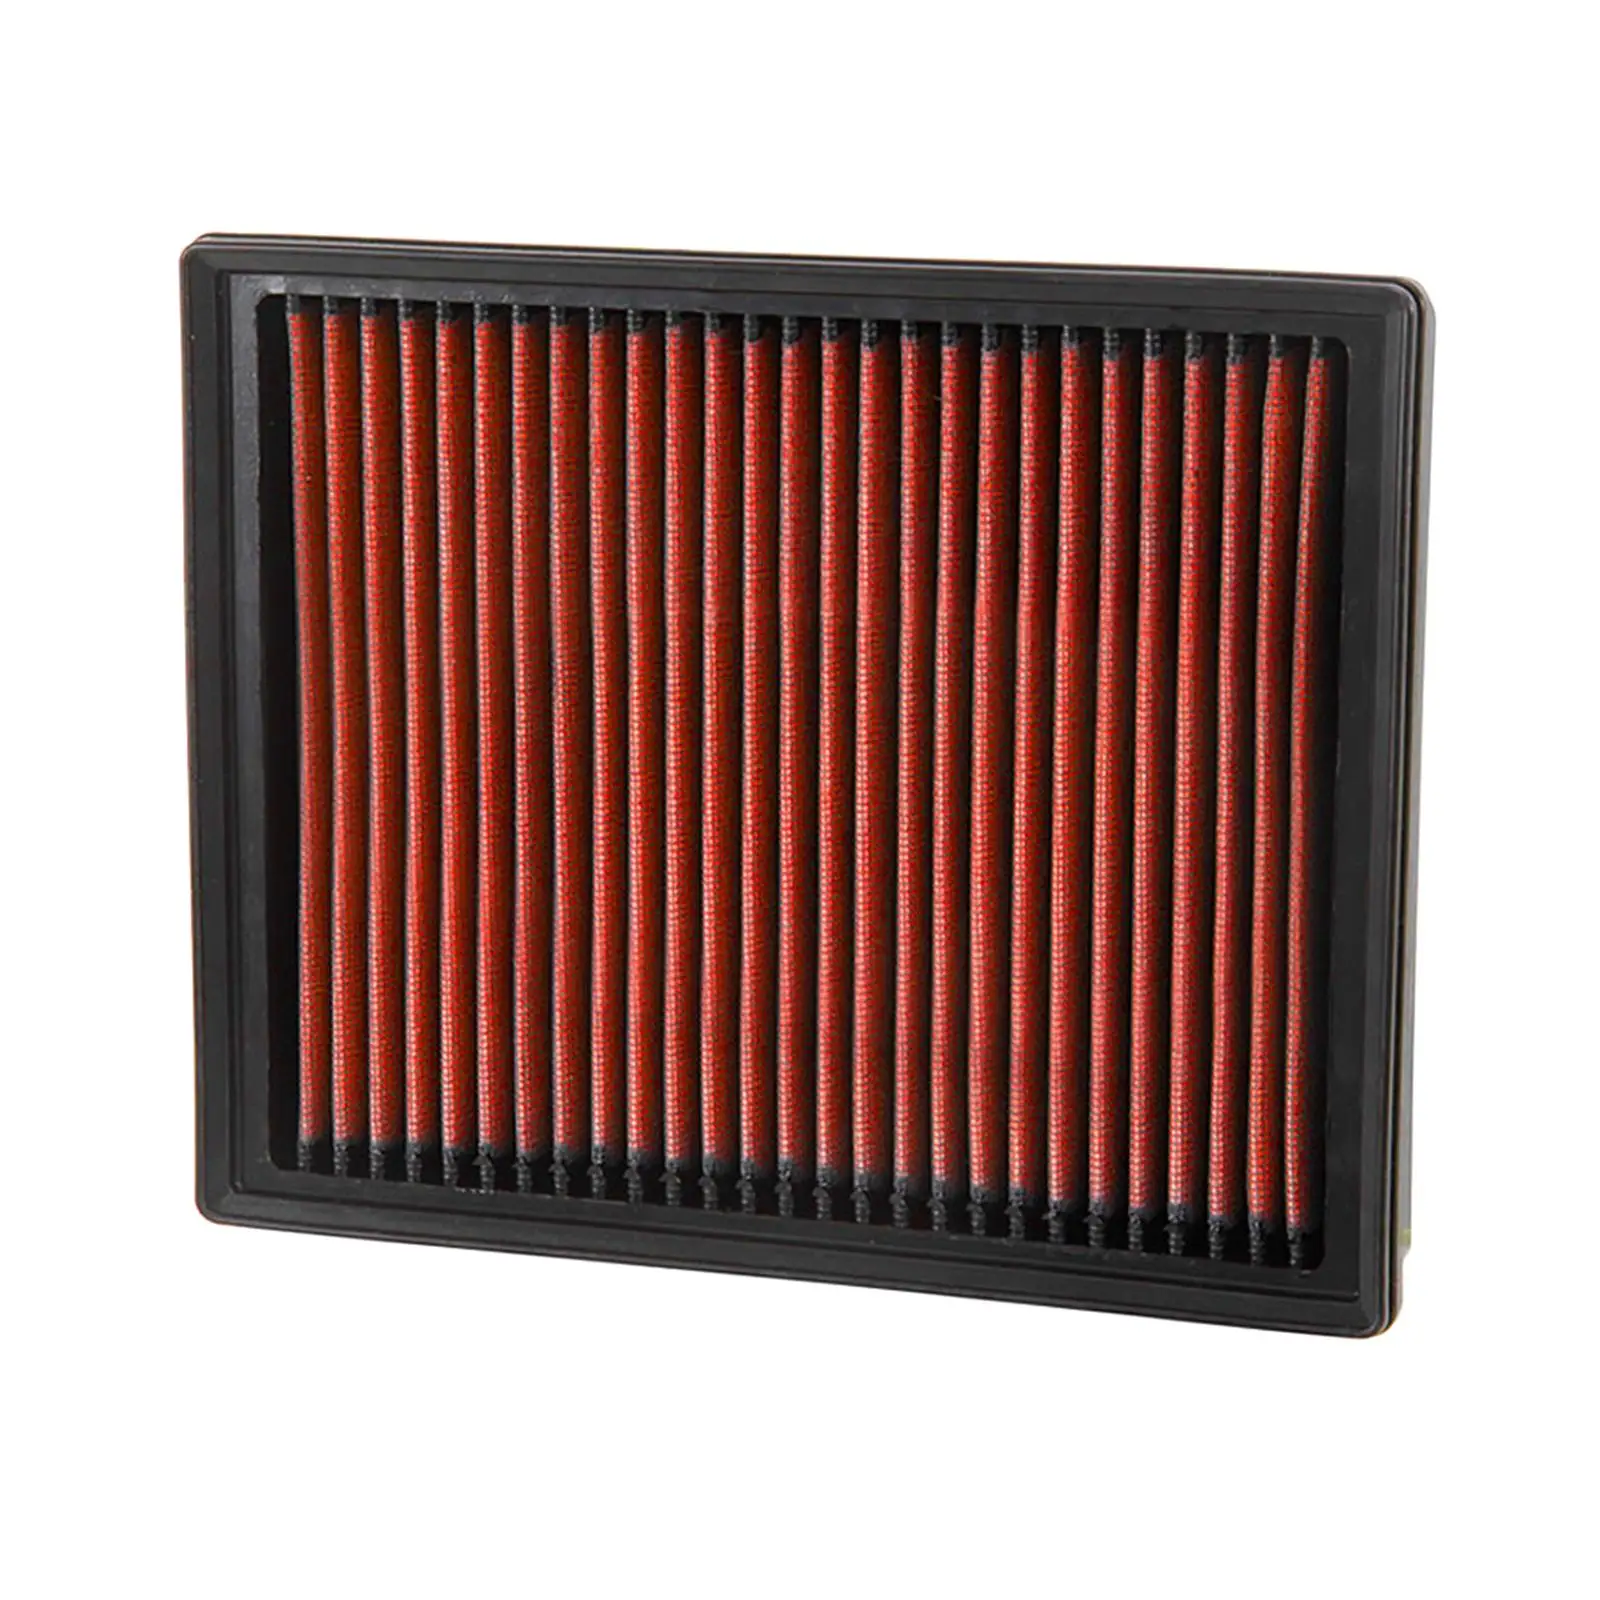 Engine Air Filter Long Use Interval Replacement Filter Air Filter Premium Washable for Ford 2018-2020 Atvs